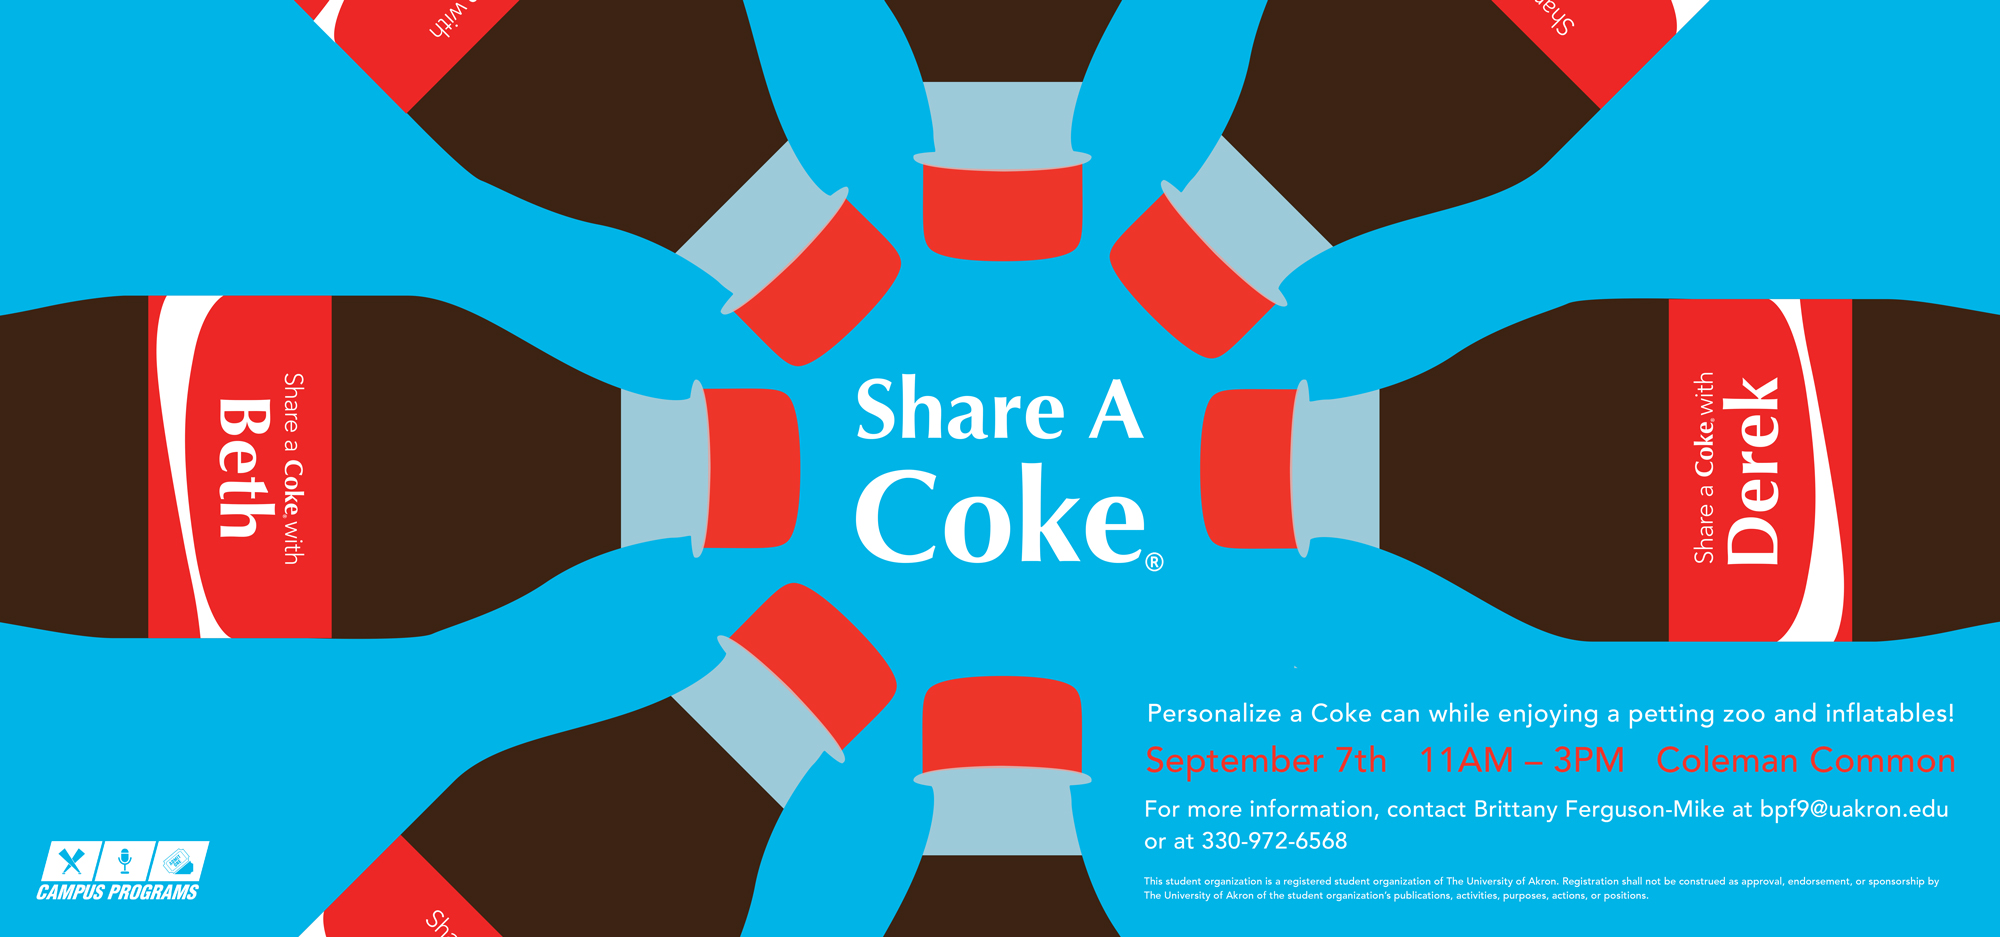 Share-a-coke-Res-Signage